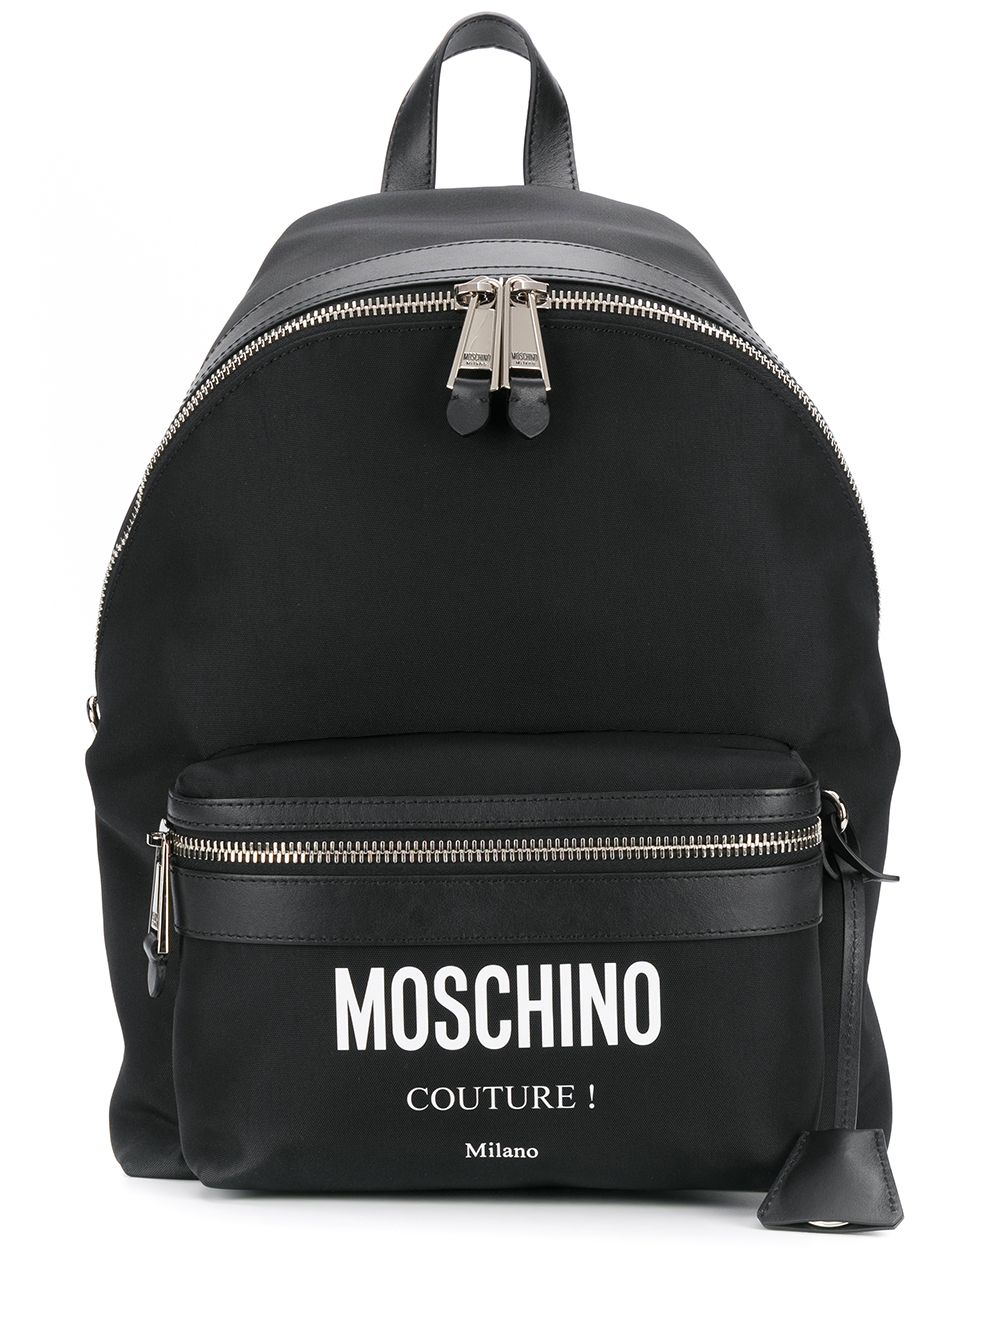 Moschino Moschino Couture! backpack